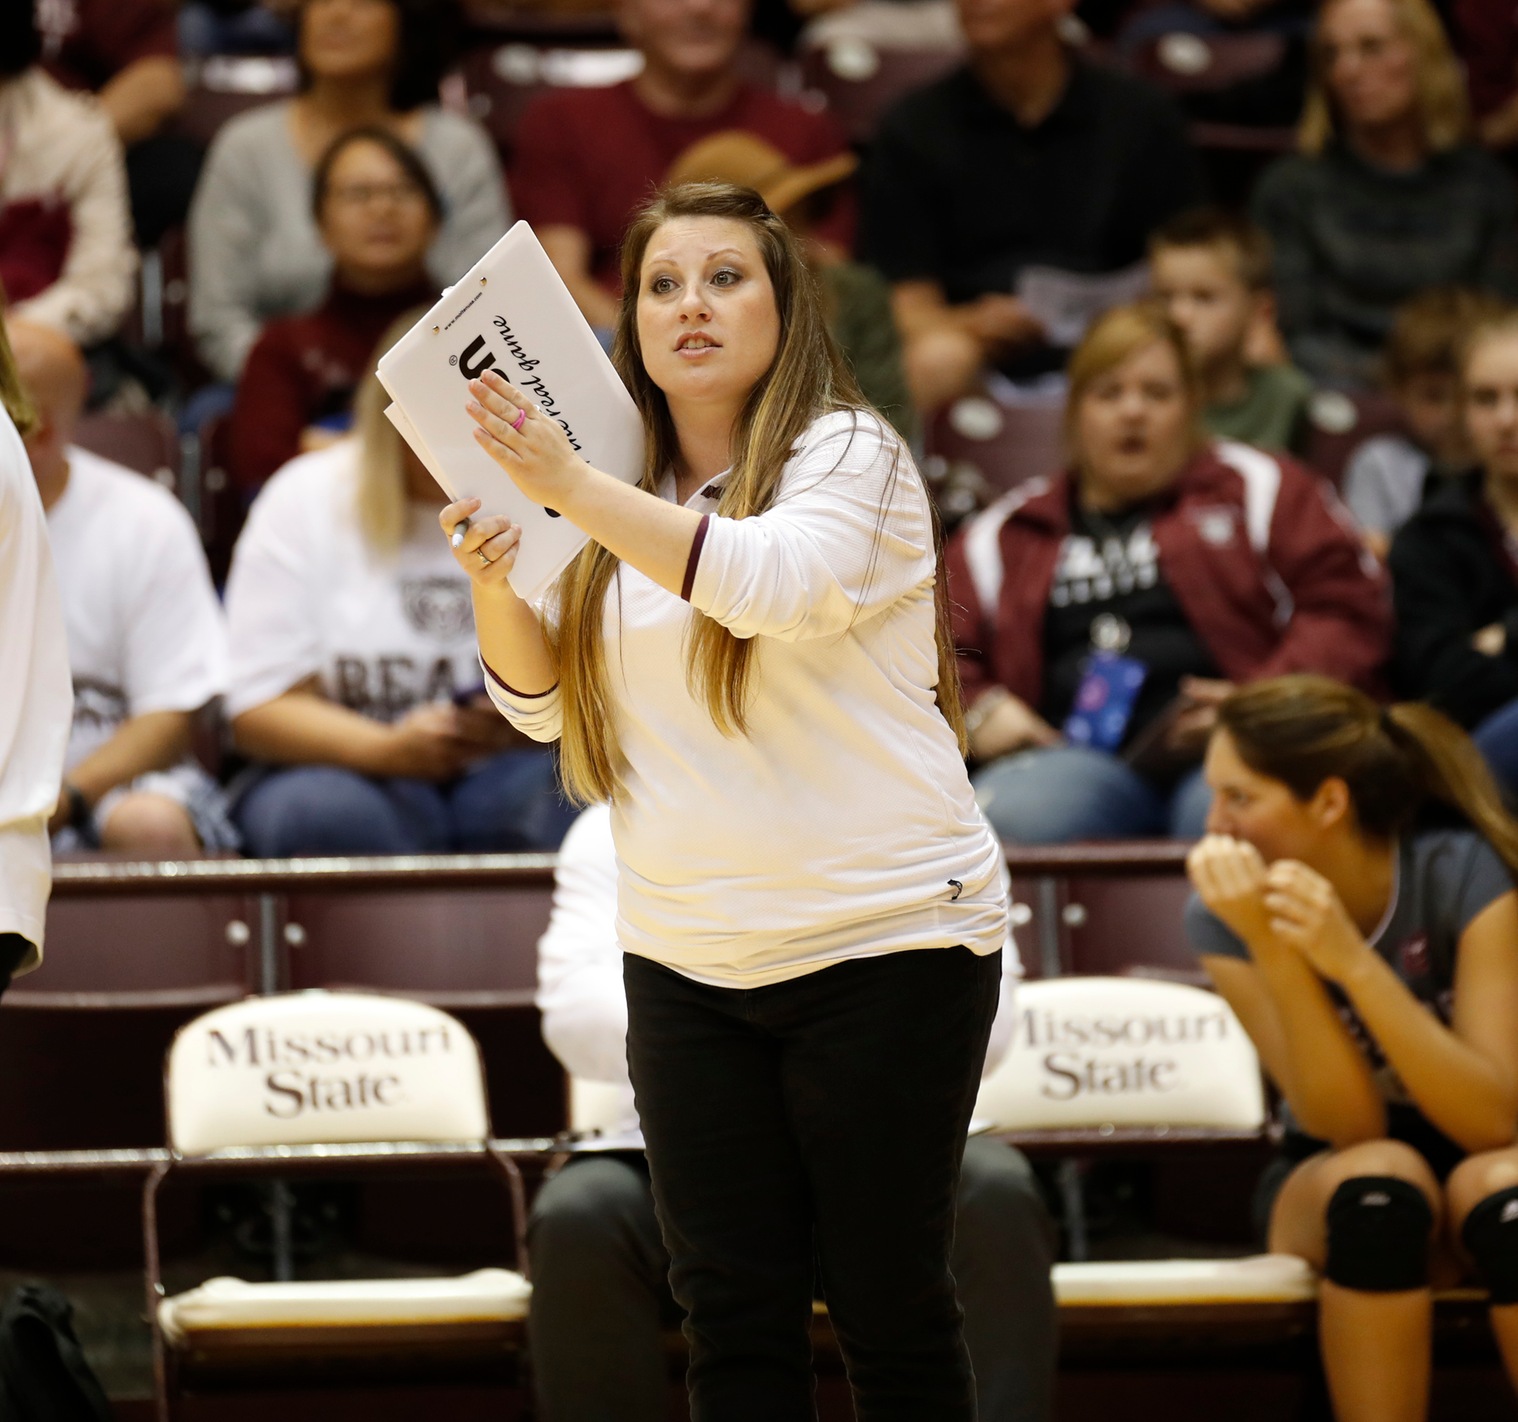 Jeannette Waldo hired to lead Tech volleyball program as new head coach